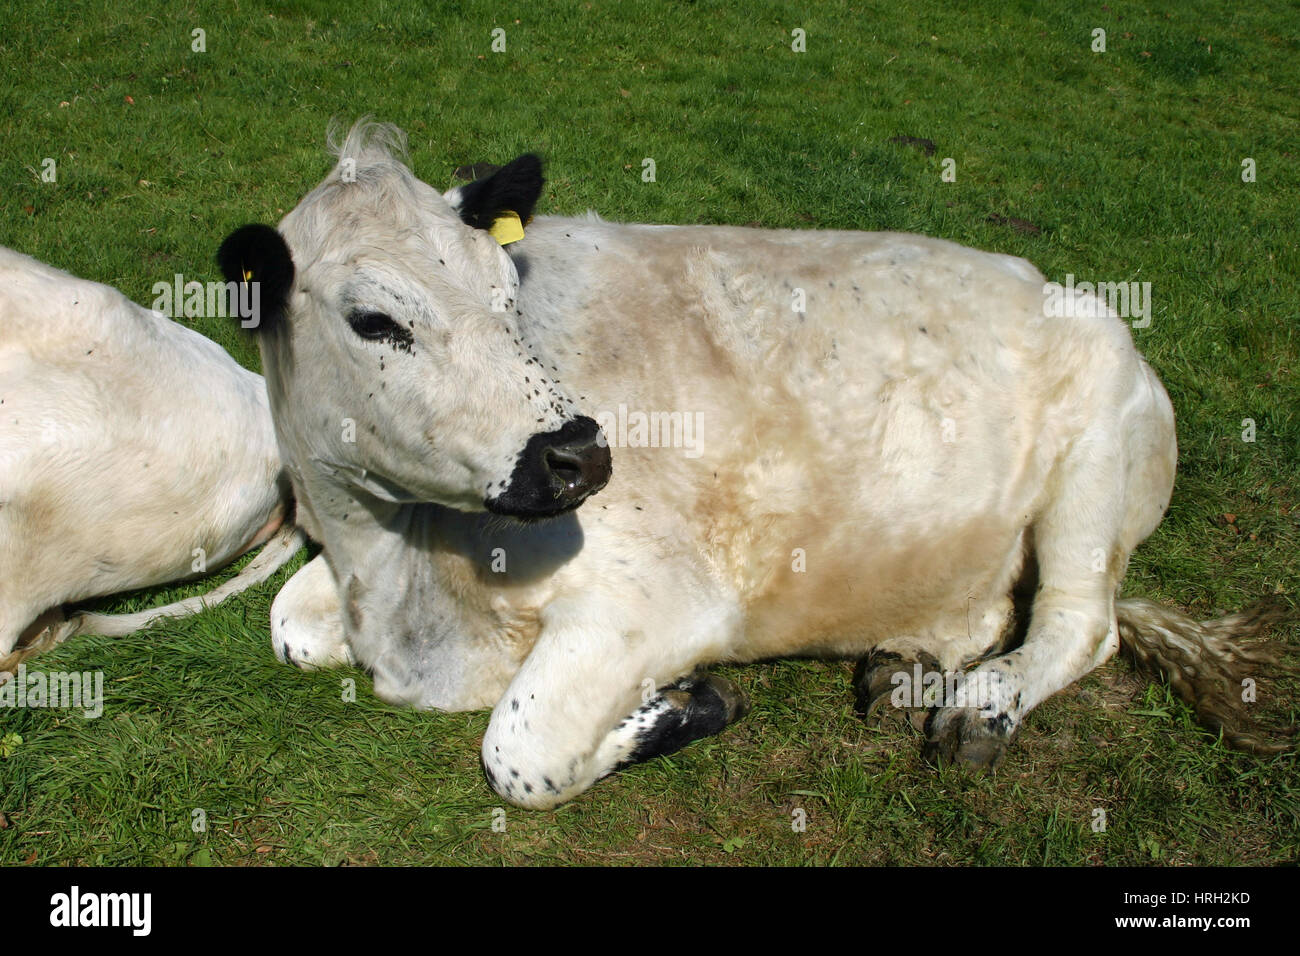 White cattle, probably the British white breed with black ears and nose, lying down in a grass field with flies around the nose and eyes. Stock Photo